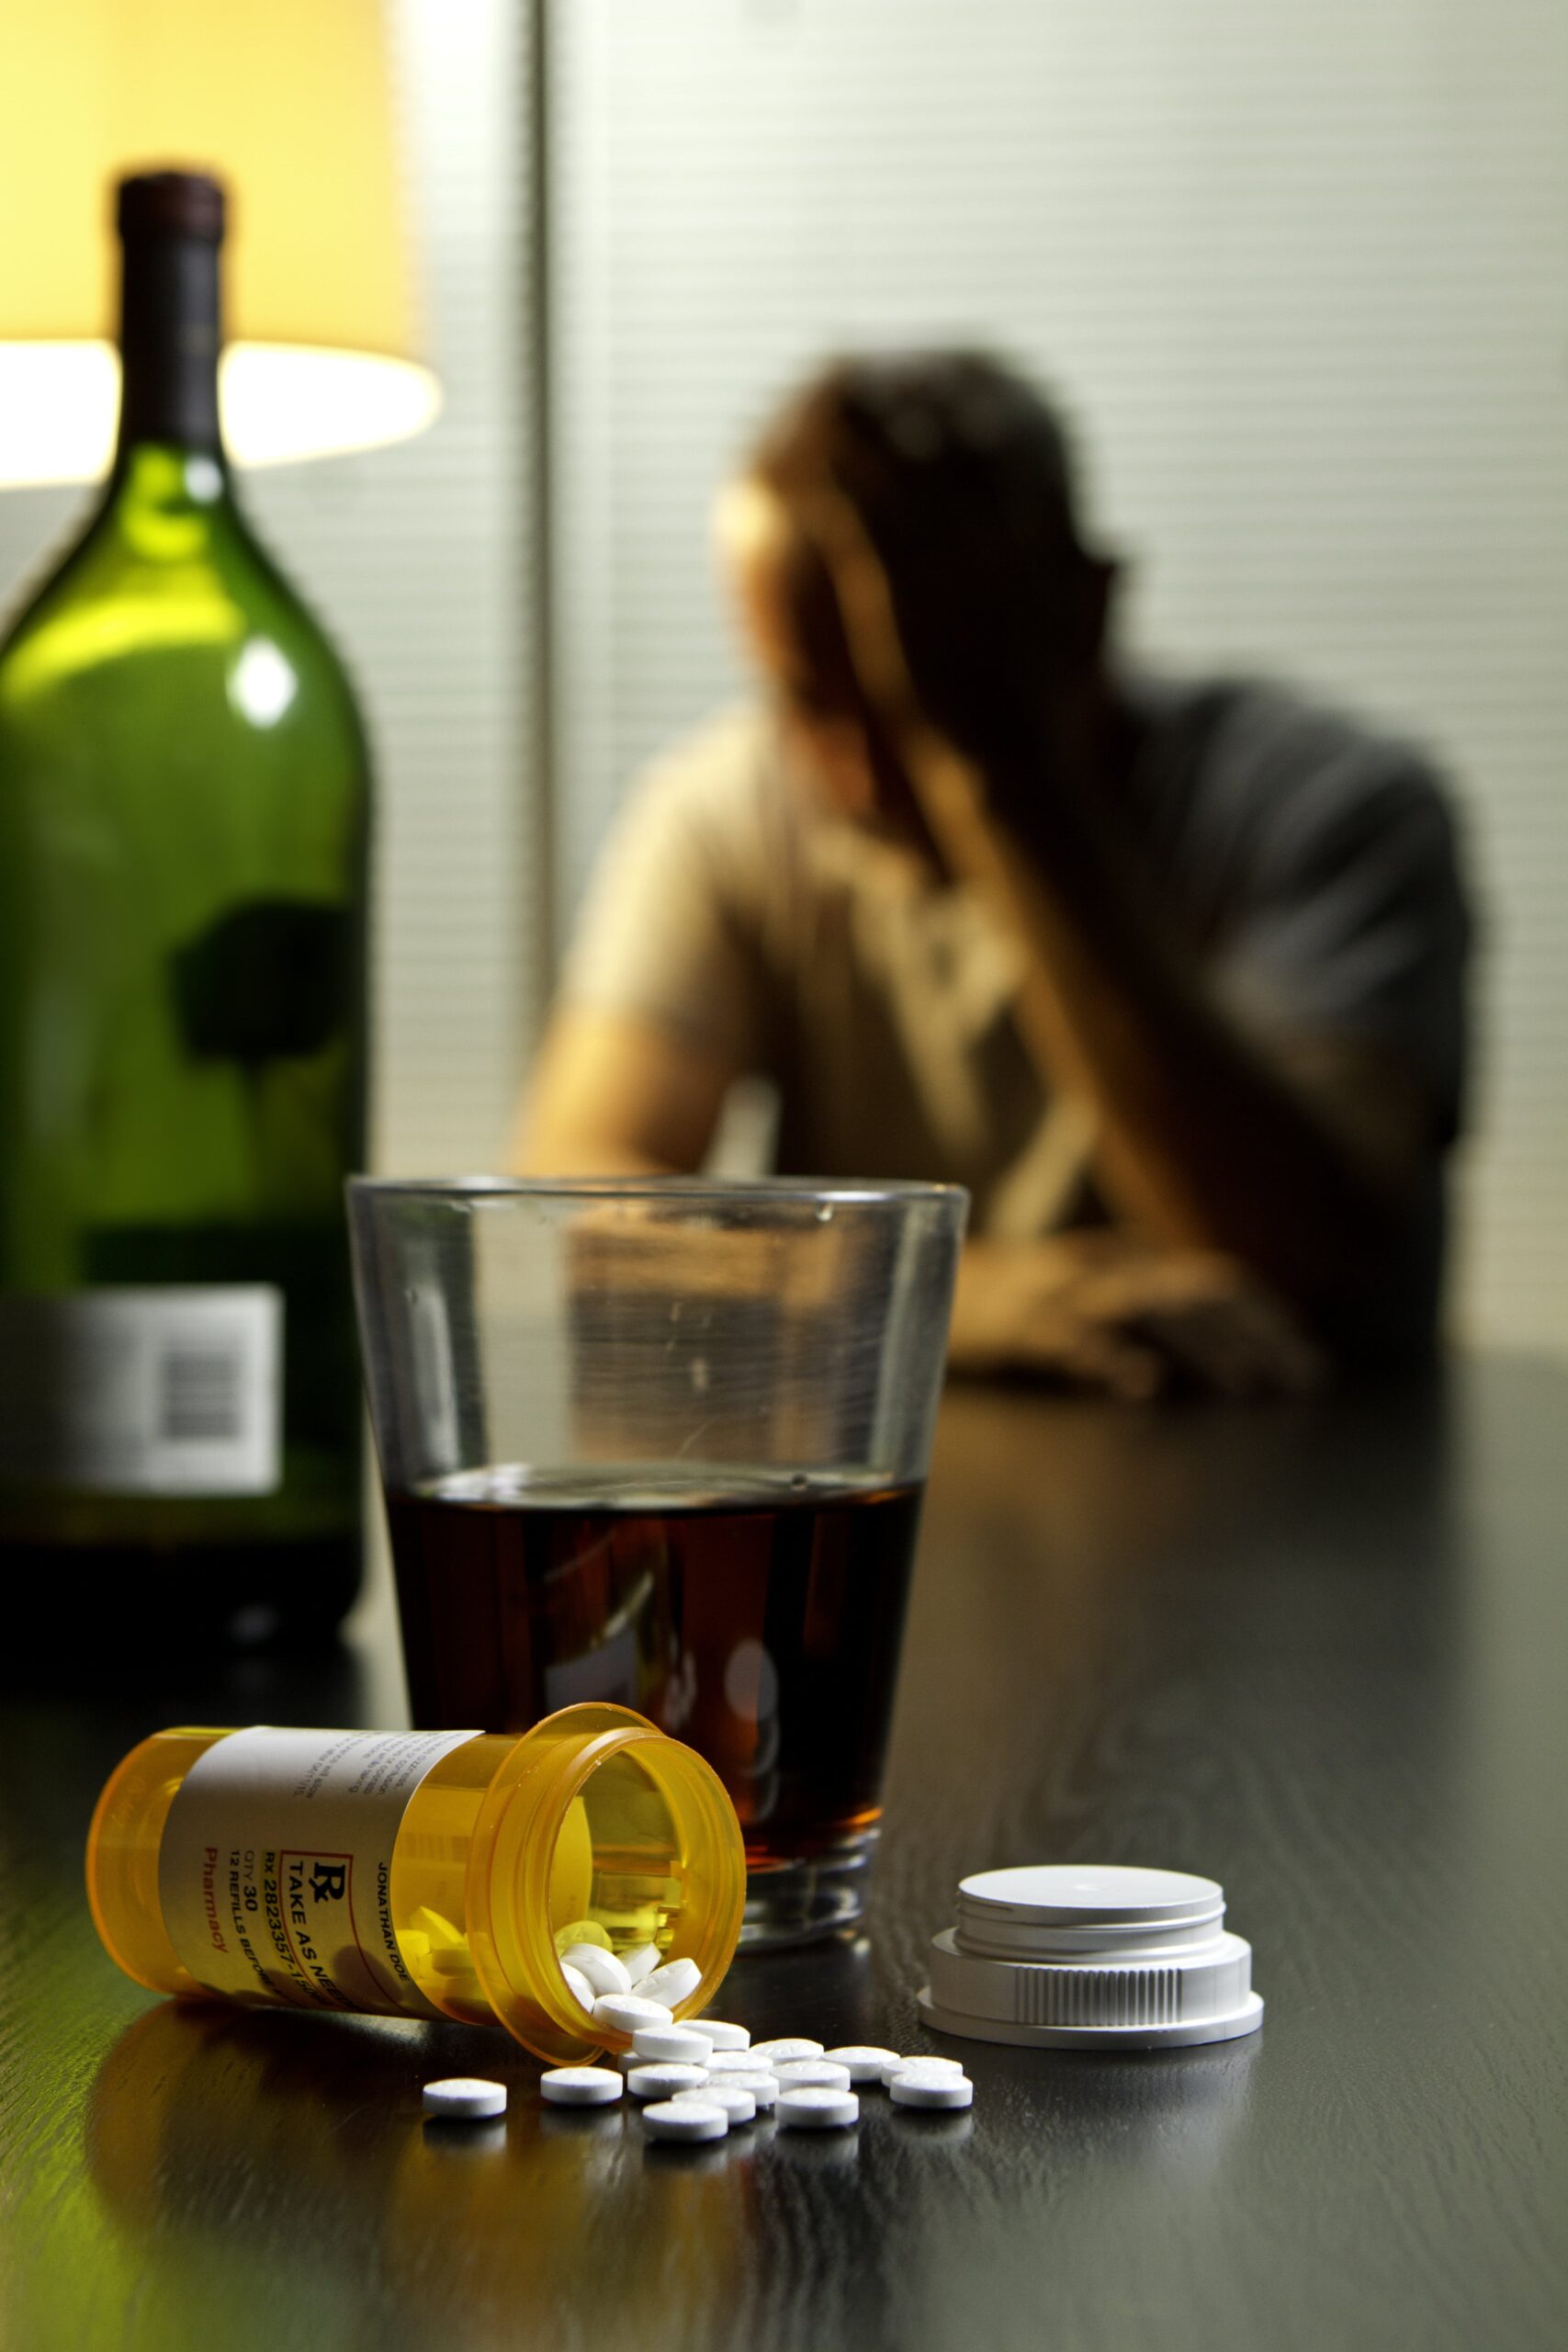 Does addiction cause dual diagnosis